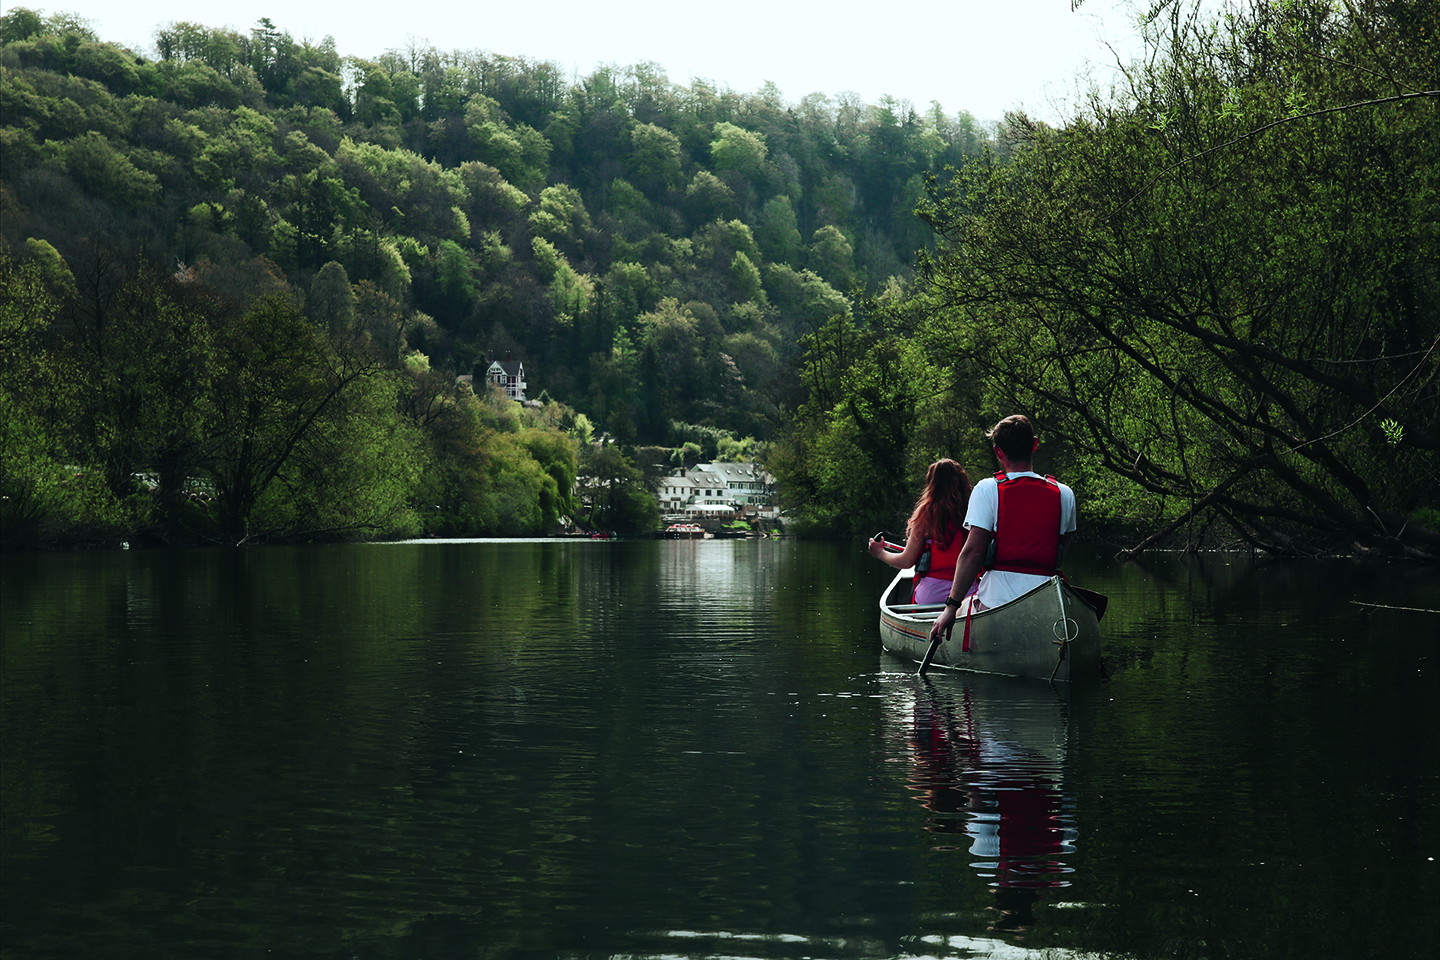 Two people canoeing on the River Wye